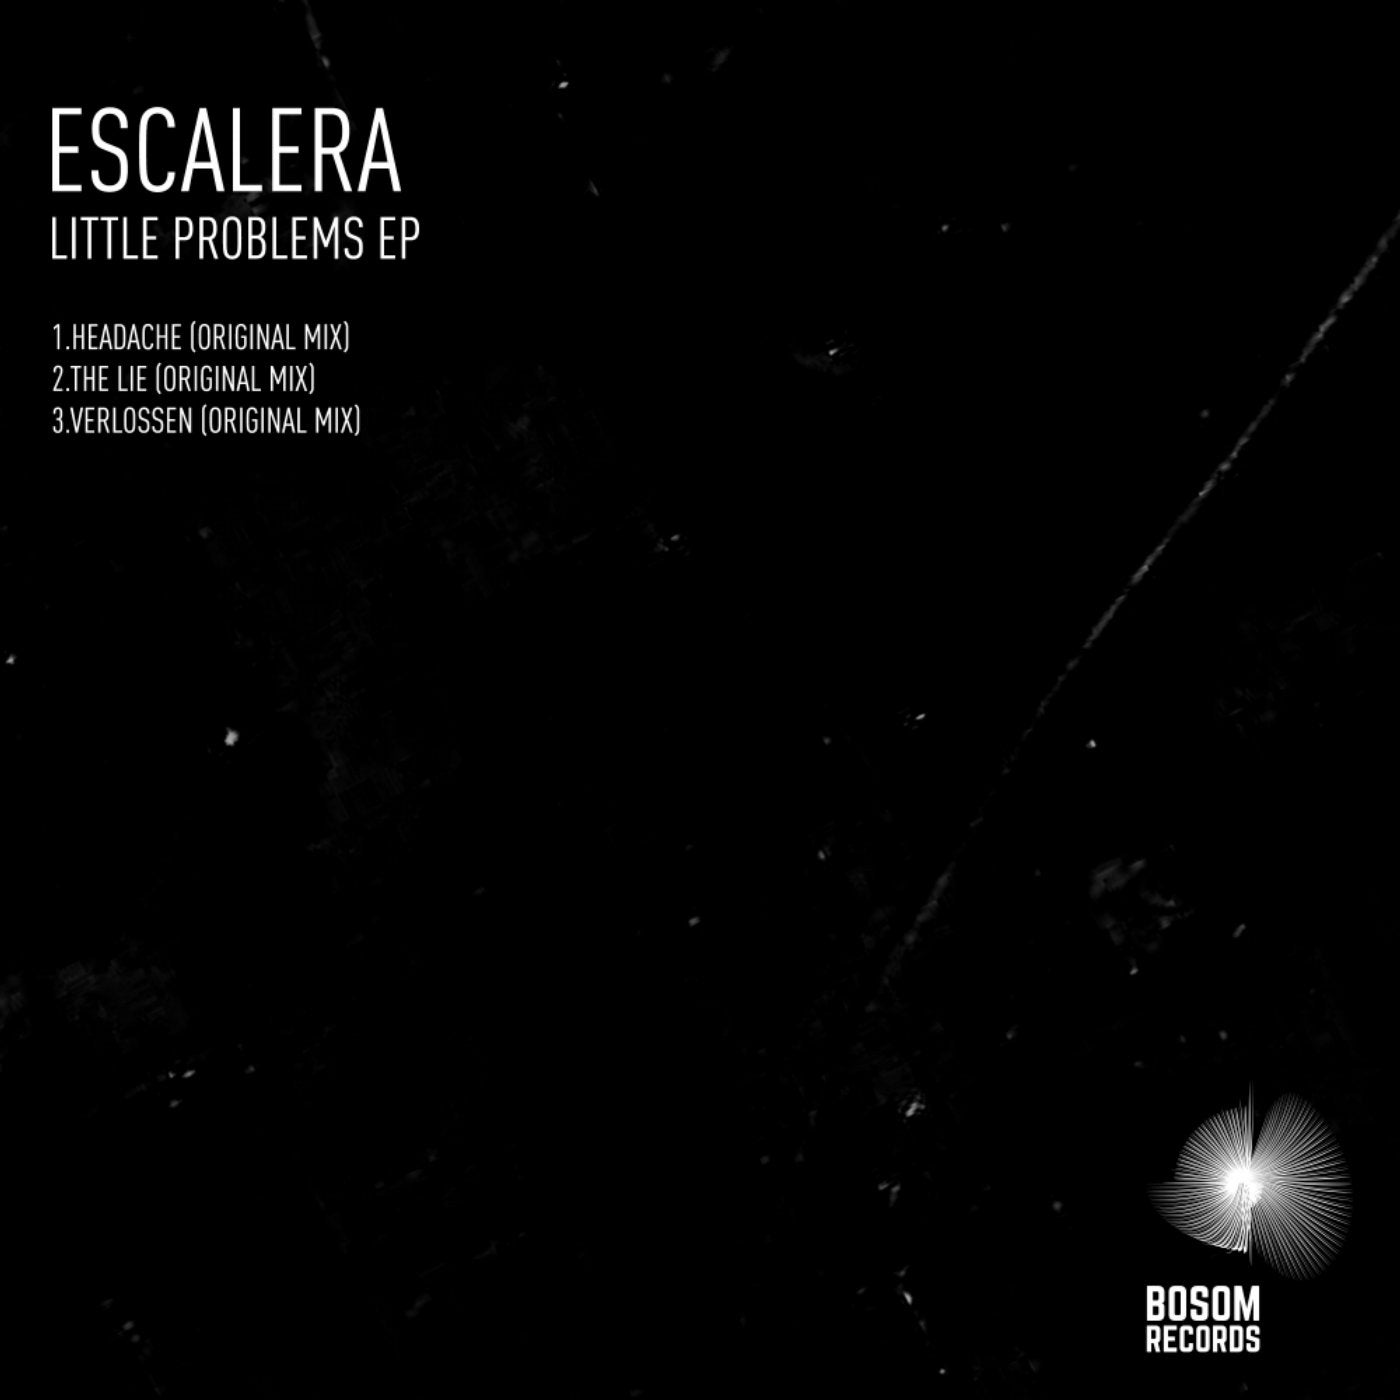 Little Problems EP